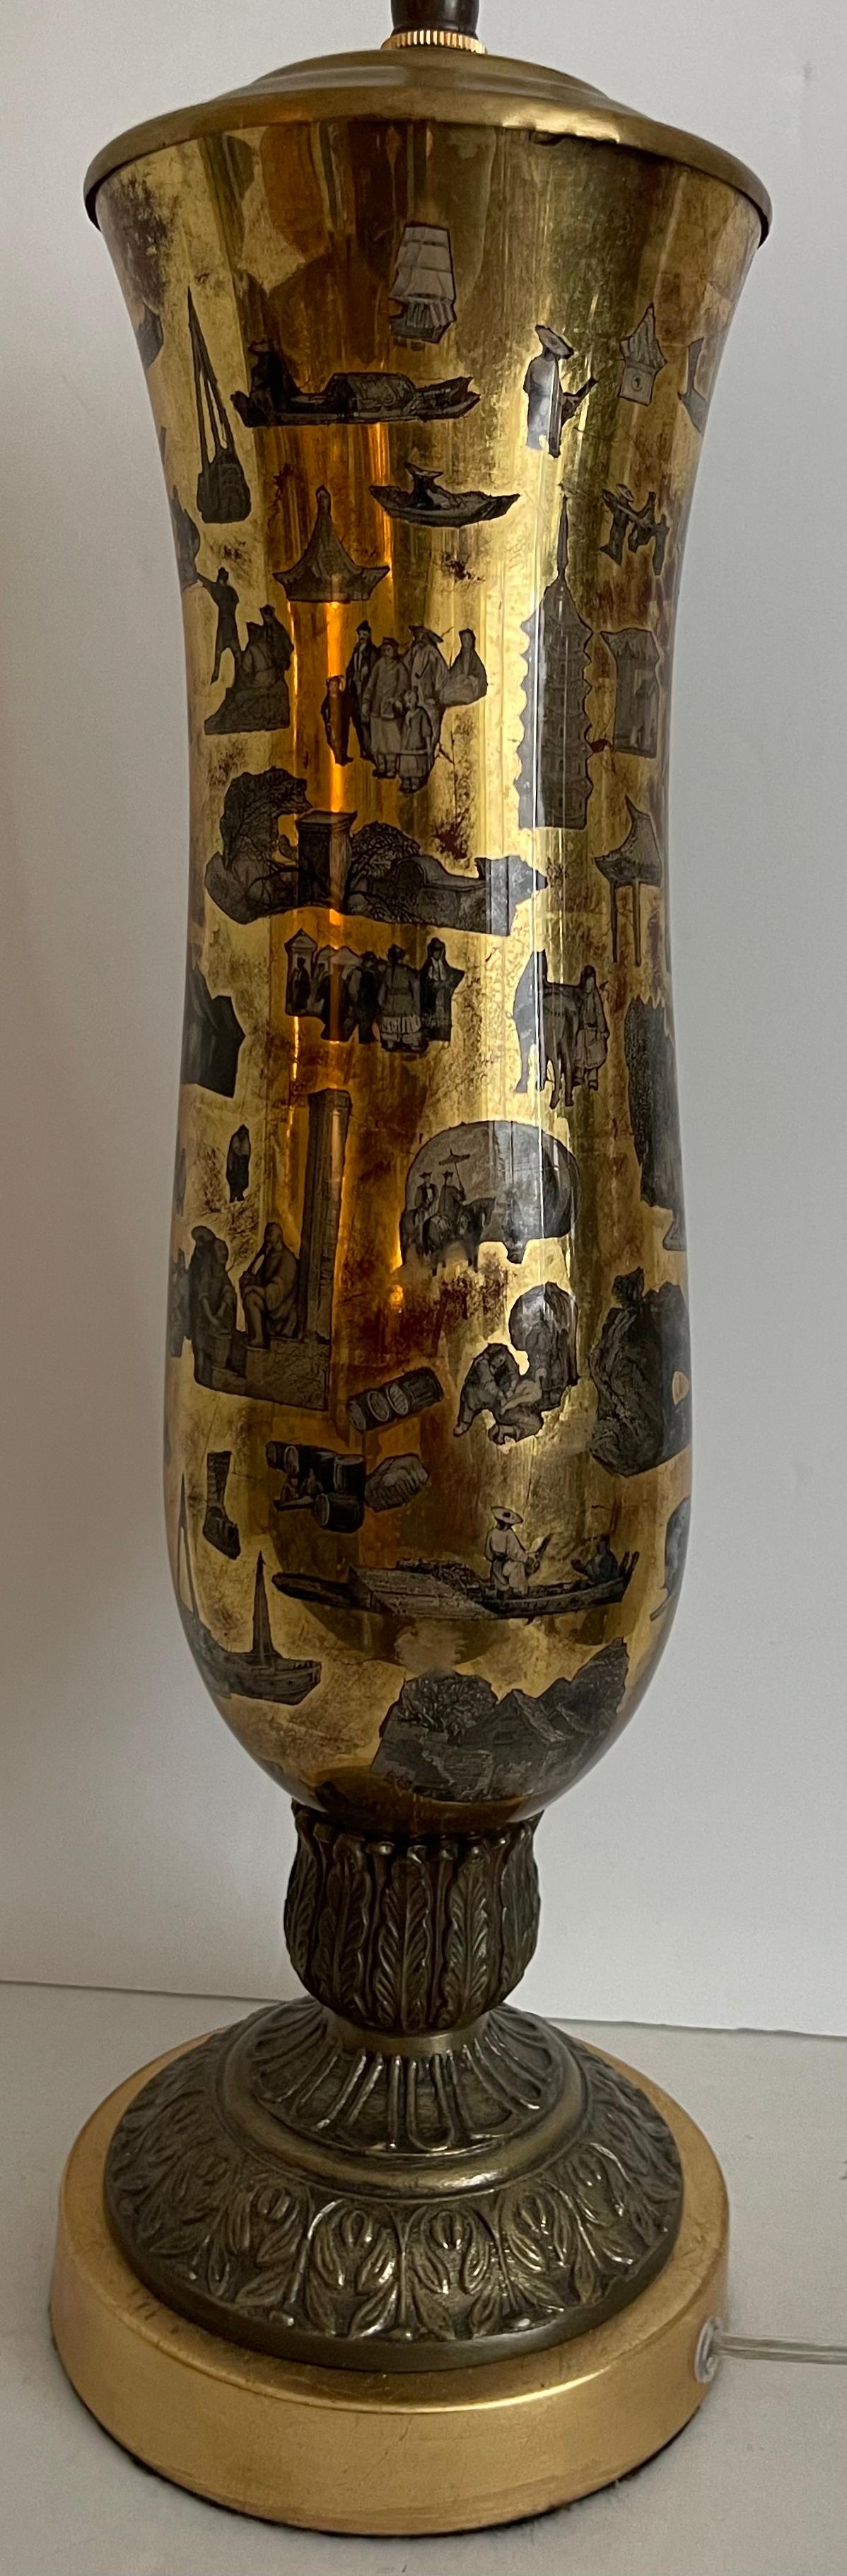 1930s Gold Chinoiserie Decalcomania Table Lamp For Sale 3